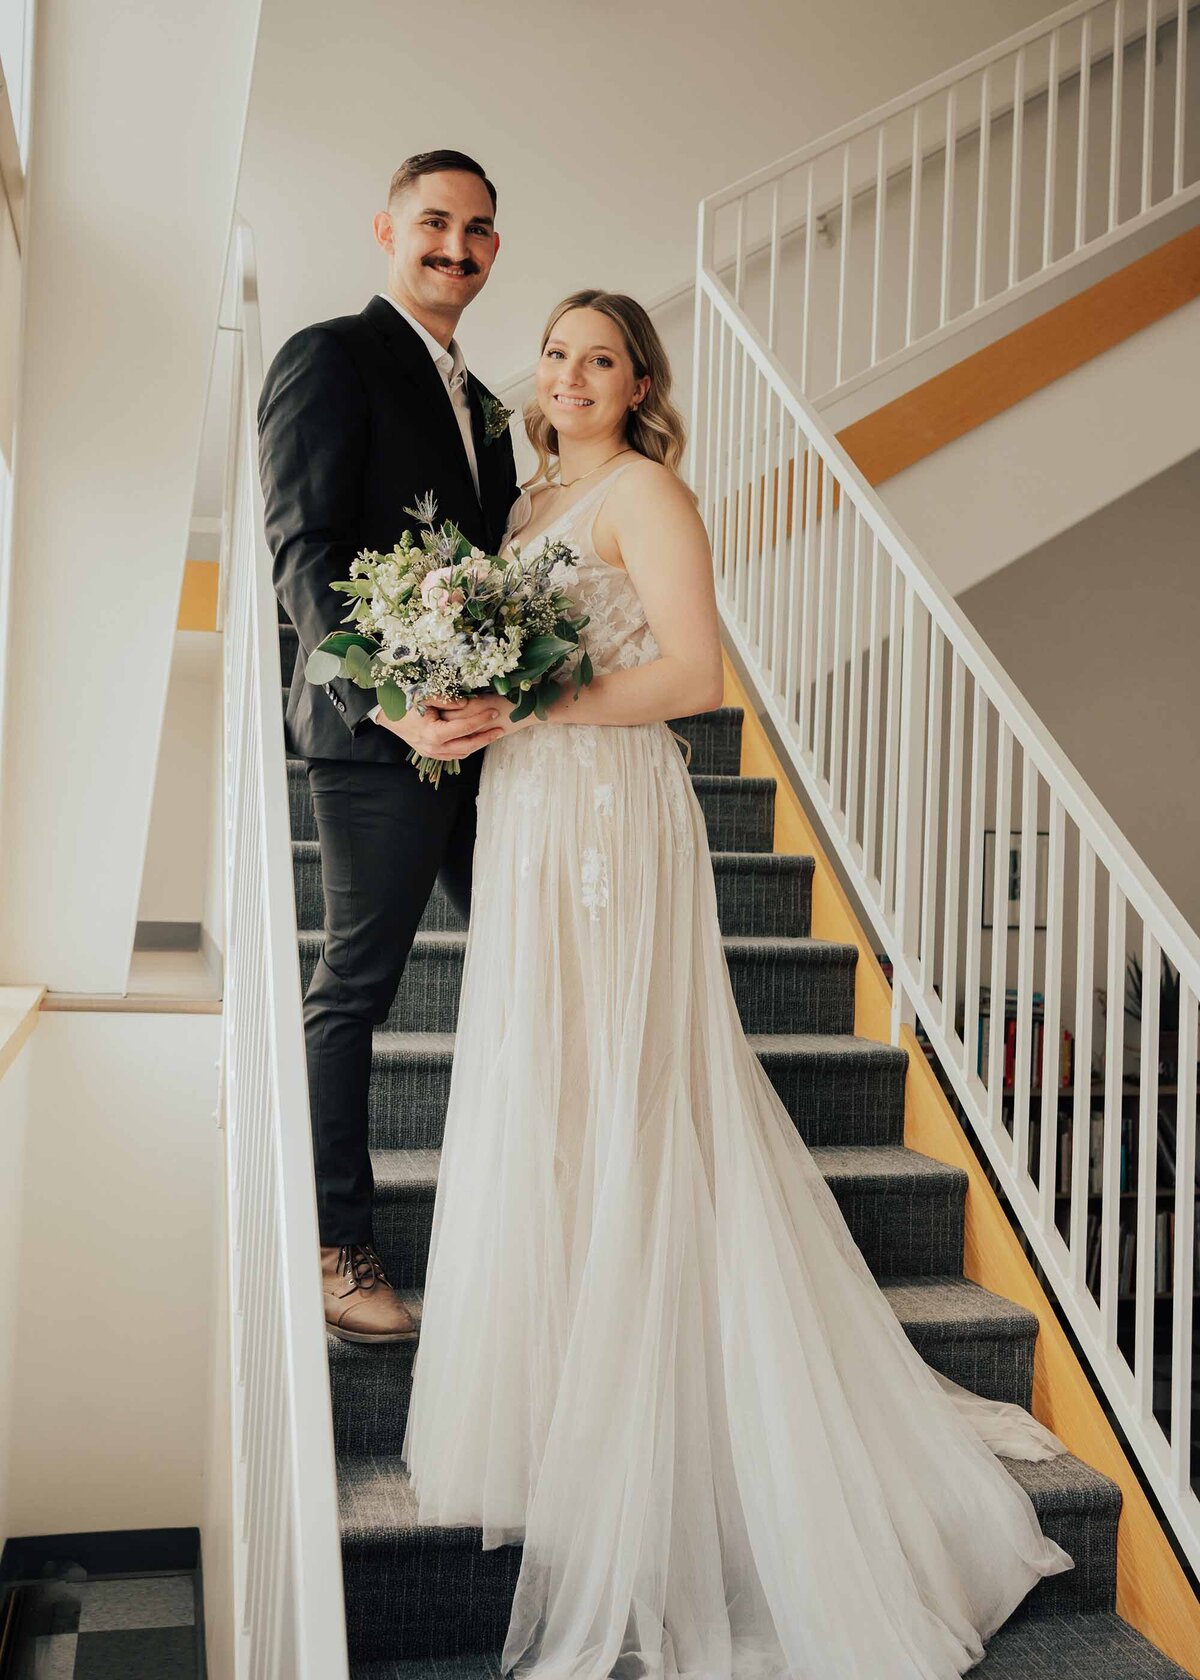 Maddie Rae Photography bride and groom standing on stairs. they are both smiling and looking at the camera. the train of her dress is flowing down the stairs